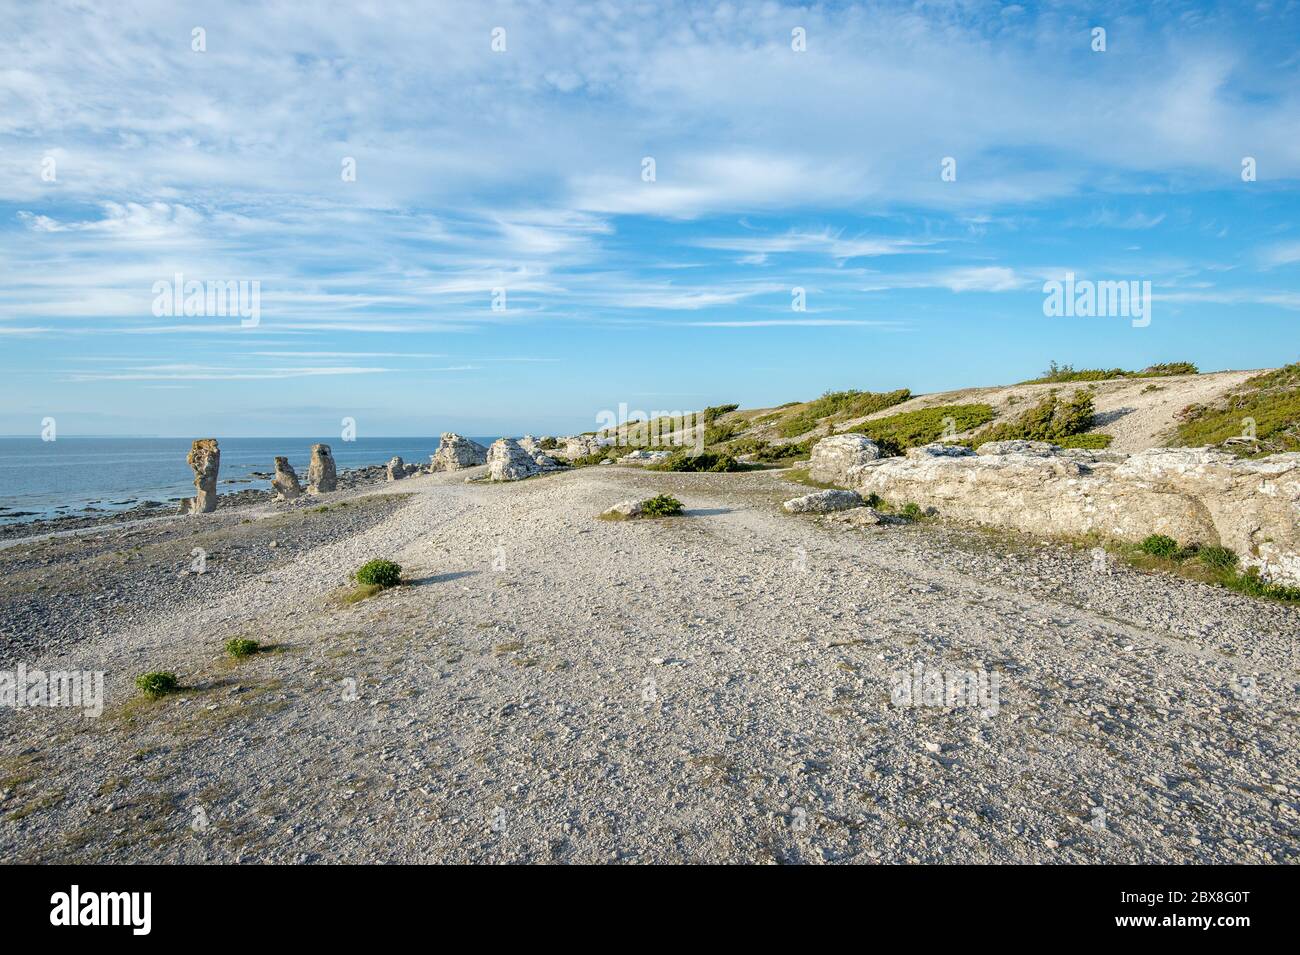 Langhammars on Fårö island in the Baltic sea. Langhammars is famous for its collection of limestone sea stacks. Stock Photo